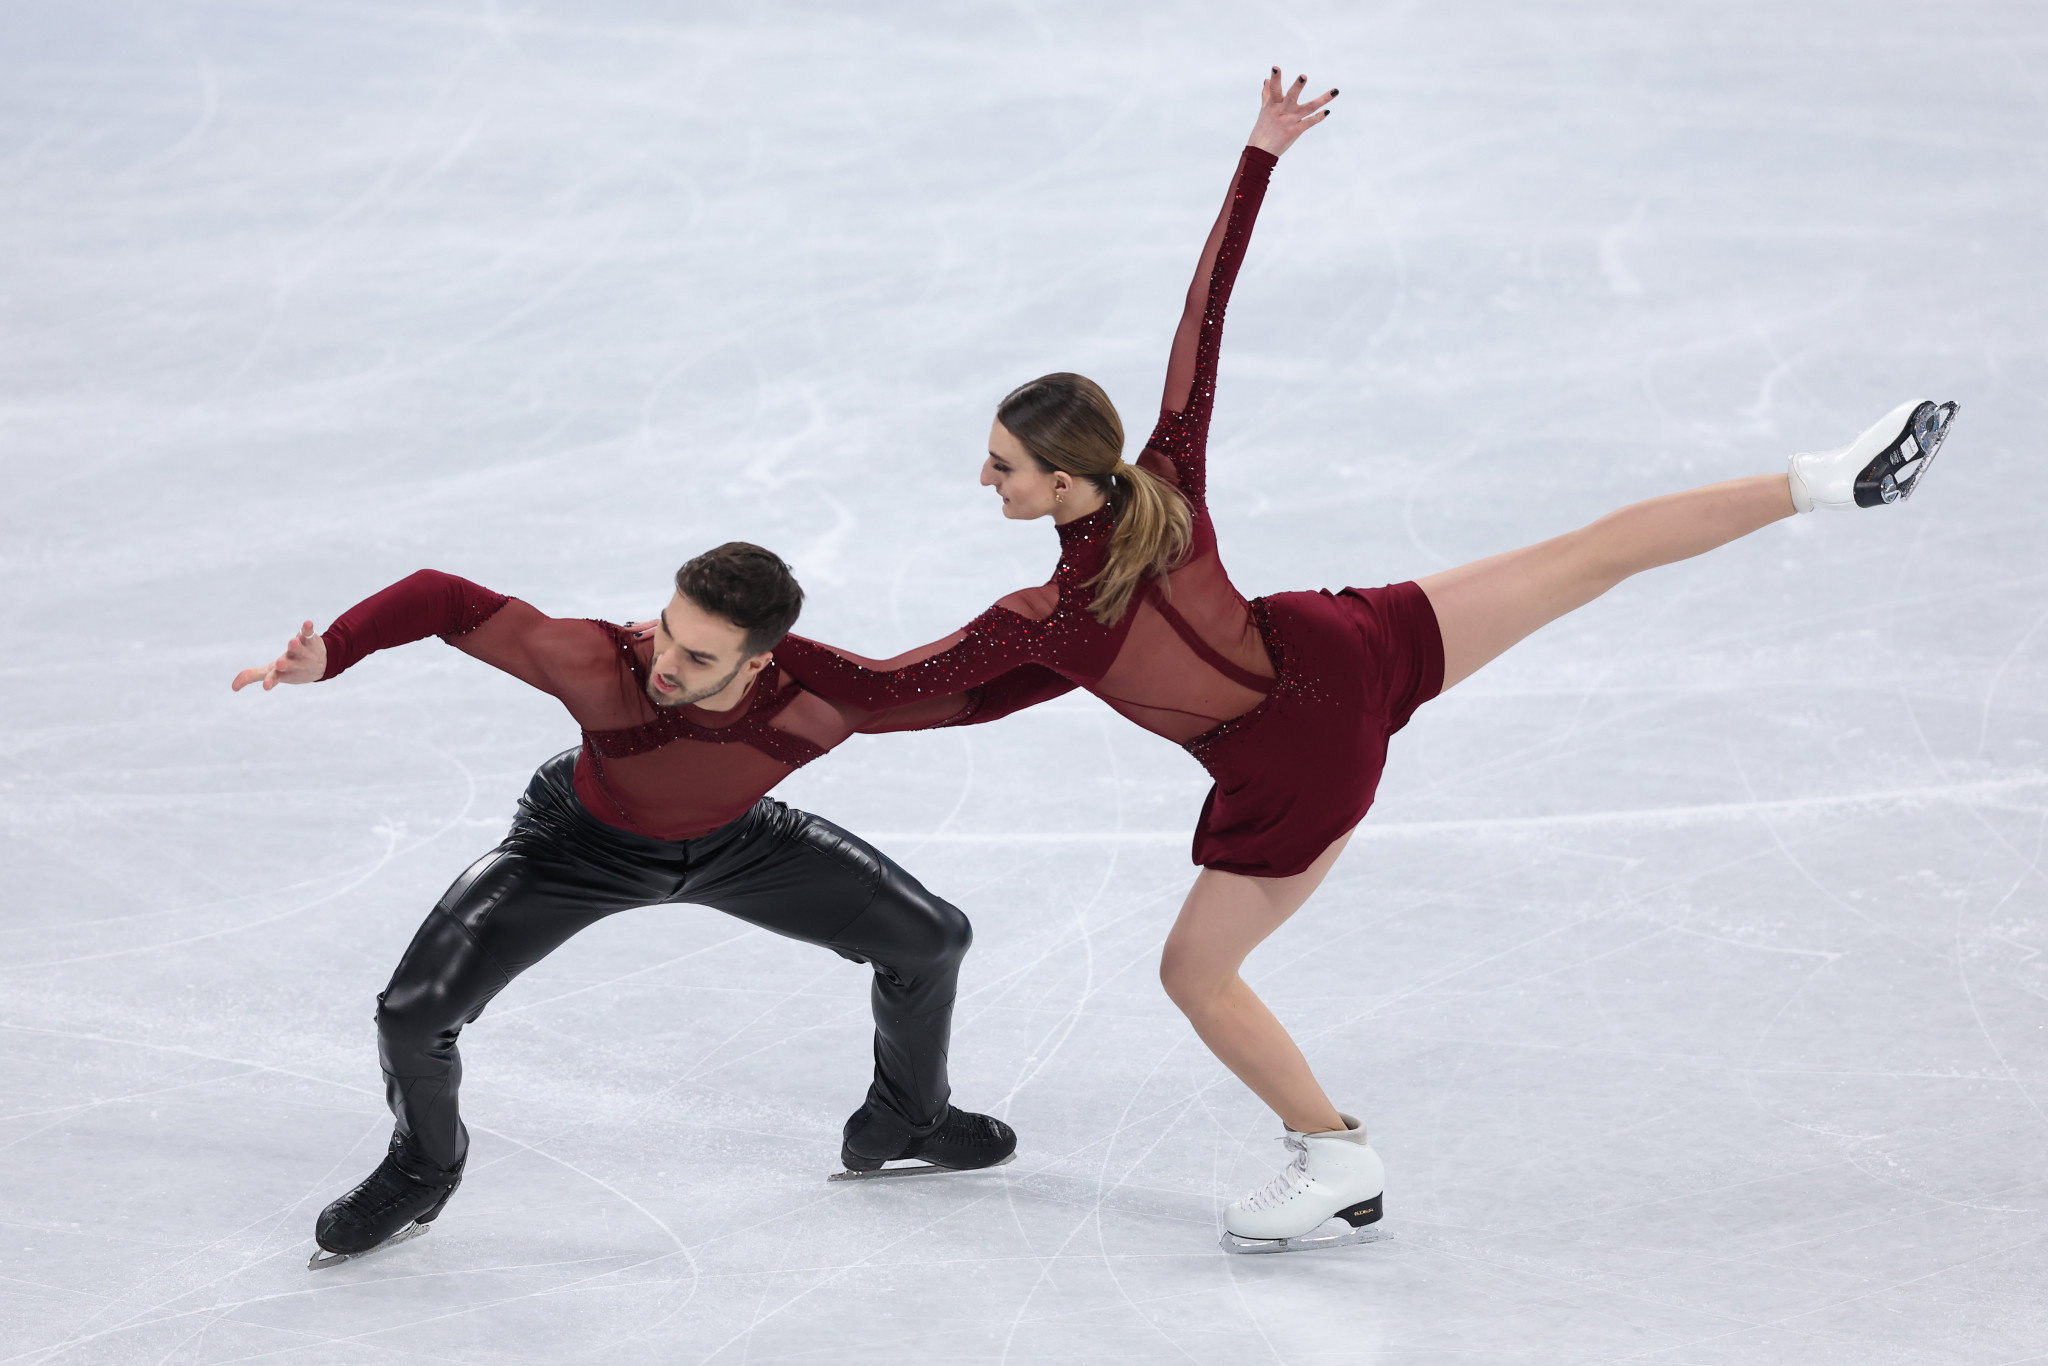 Gabriella Papadakis and Guillaume Cizeron of France set a new world record of 90.83 in figure skating's ice dance discipline ©Getty Images